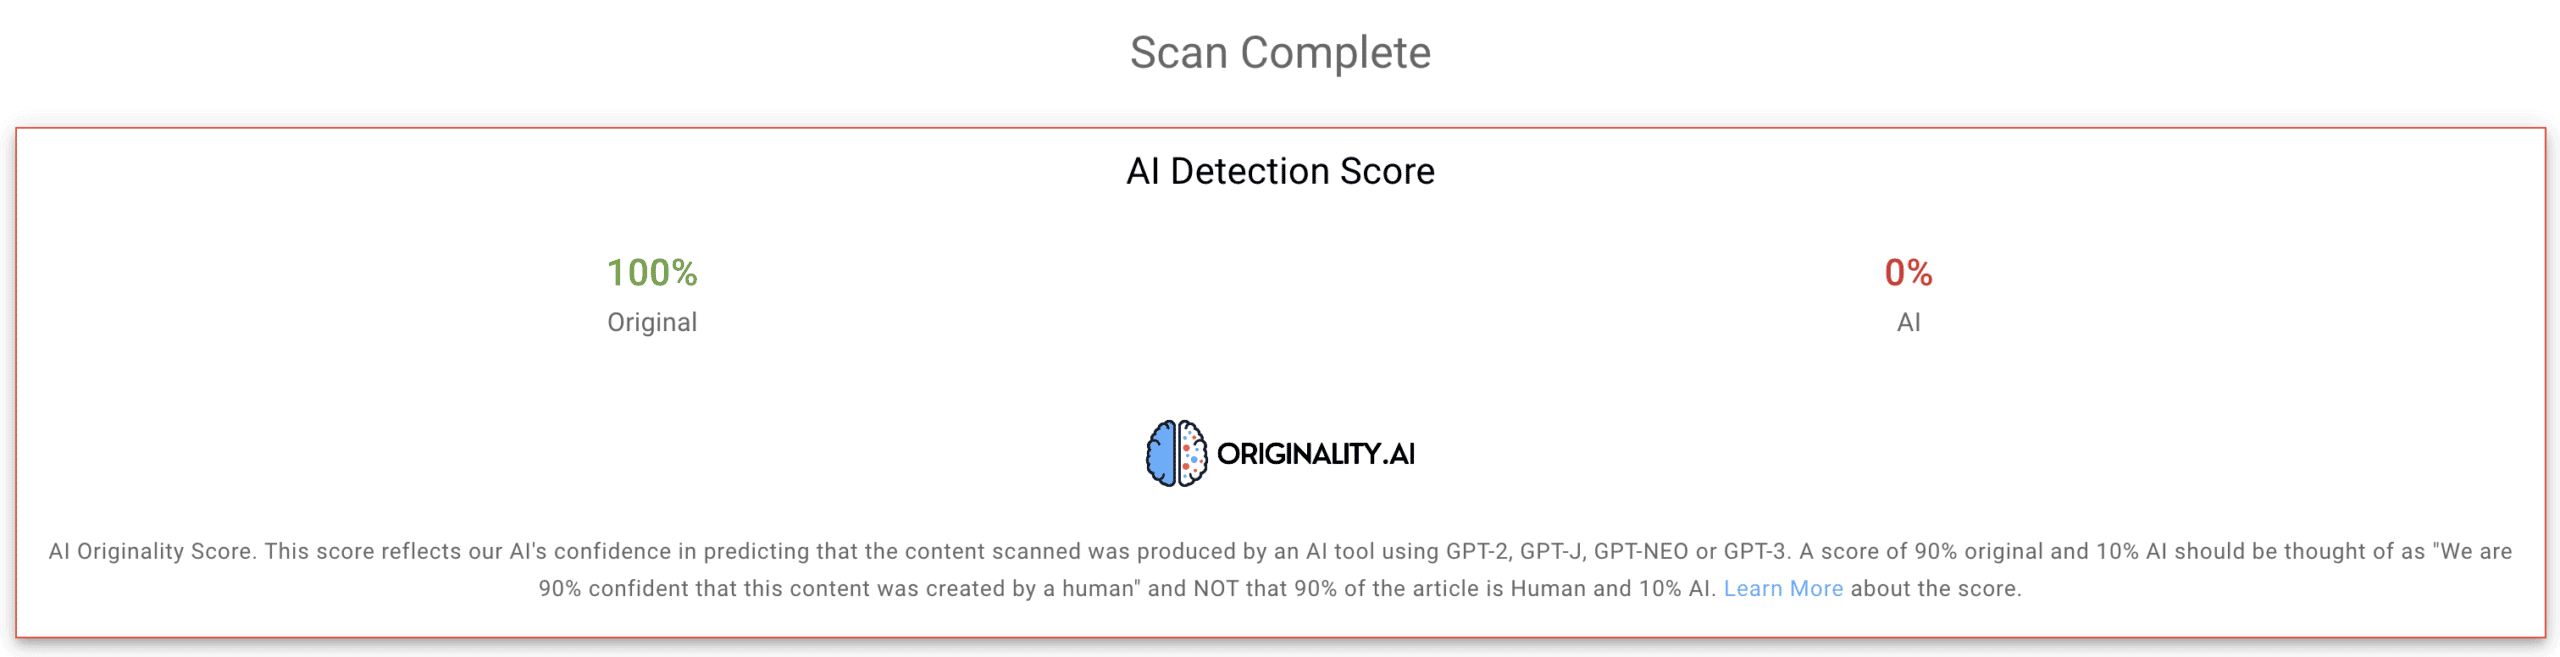 After revising ChatGPT and QuillBot content, Originality.ai produced a 0% AI score, showing this was written by a human.